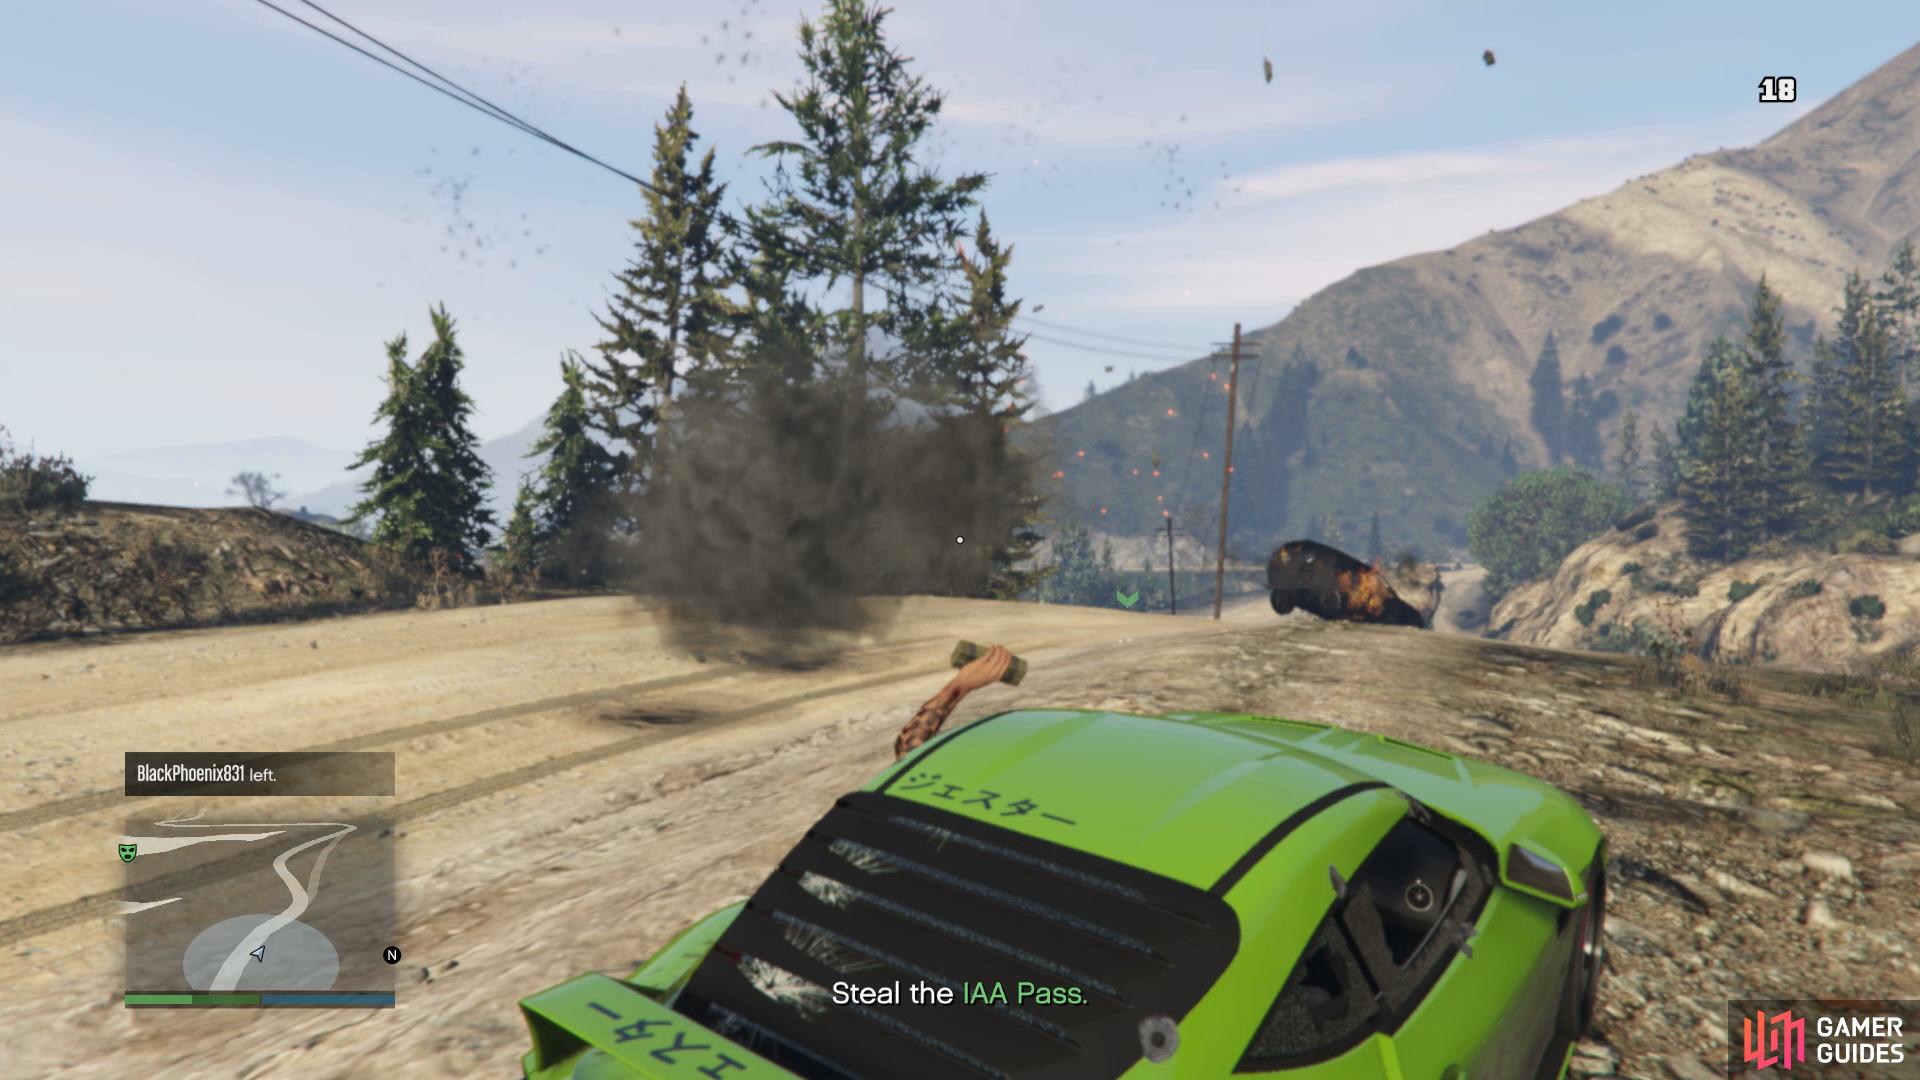 then chase down the agent you're looking for and destroy his vehicle with Sticky Bombs. 